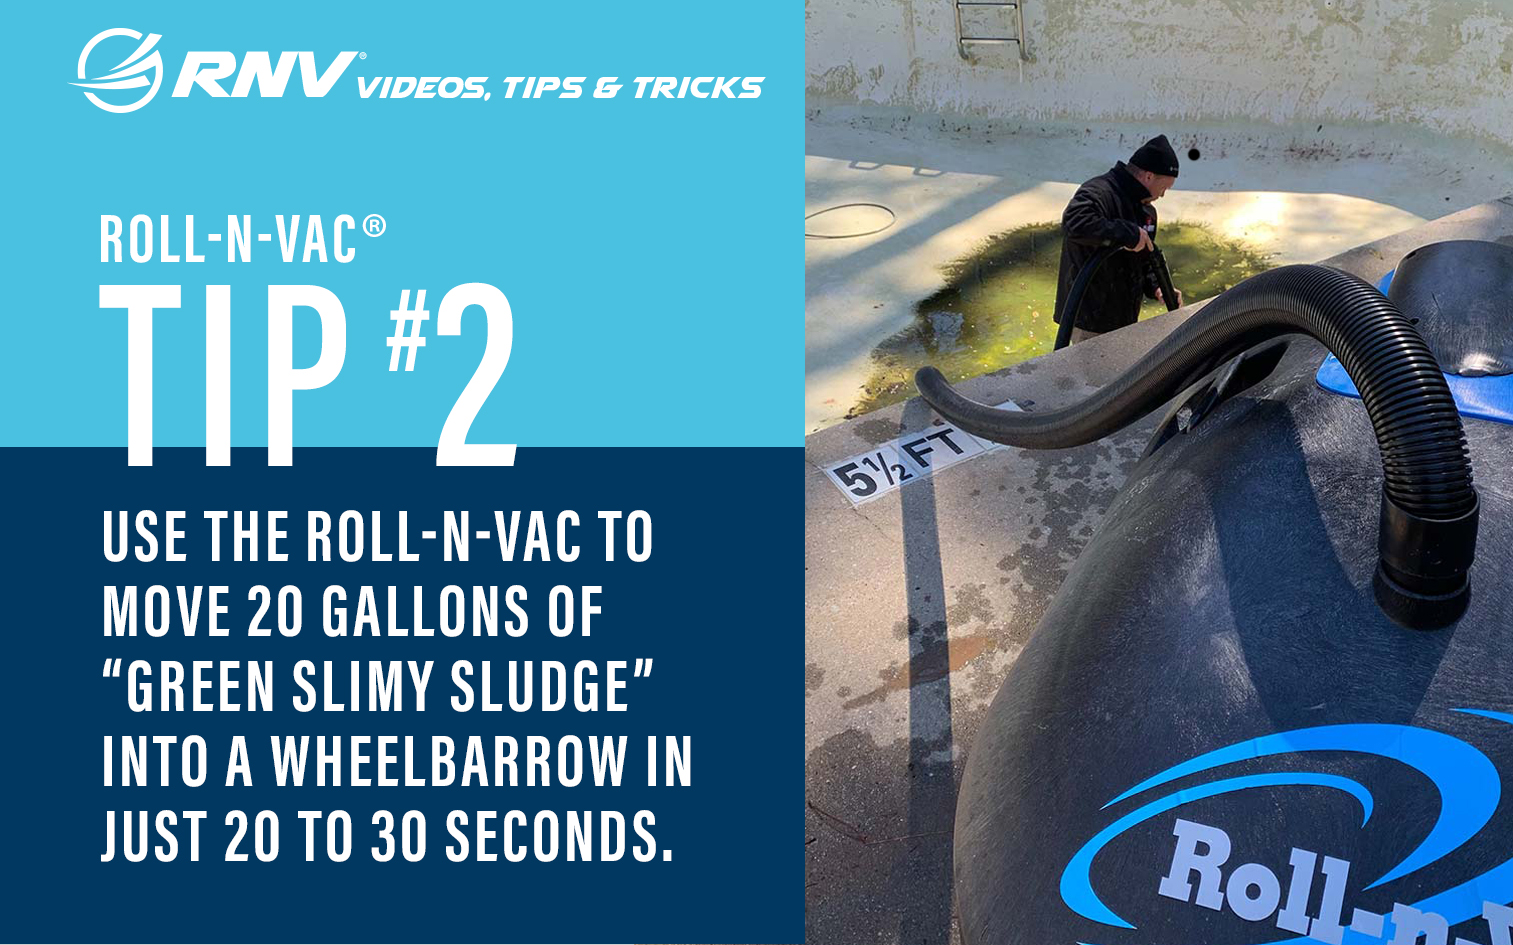 Roll-n-vac Tip #2 Use the Roll-n-Vac to move 20 Gallons of "Green Slimy Sludge" into a wheelbarrow in just 20 to 30 seconds